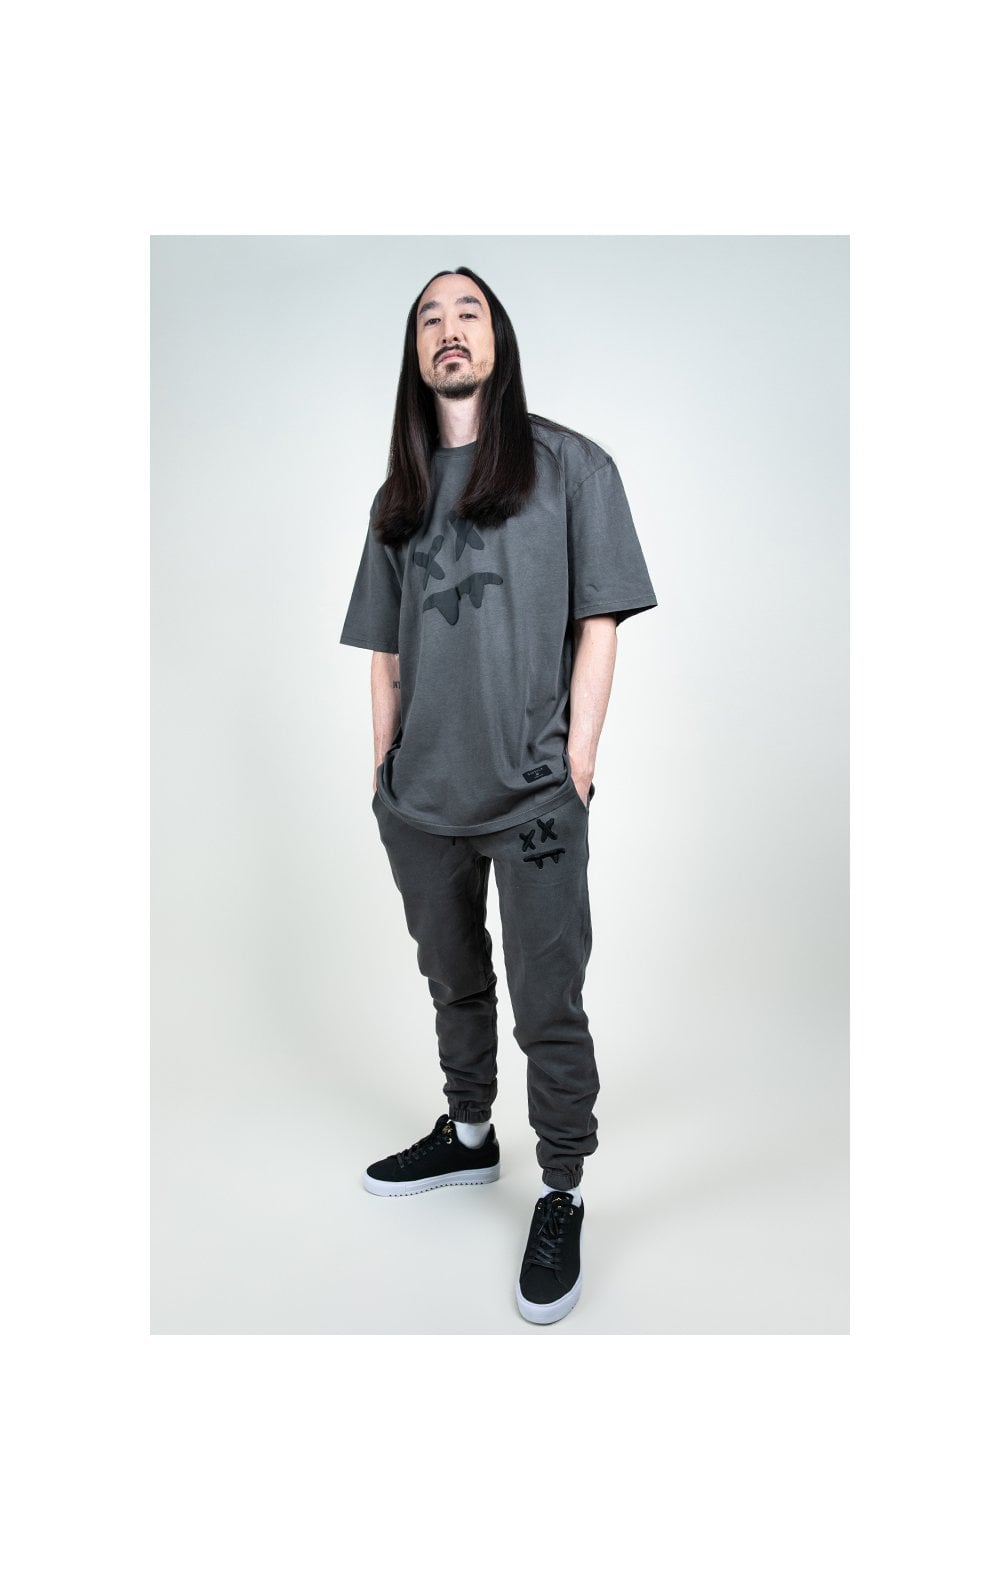 SikSilk X Steve Aoki S/S Oversize Essential Tee – Washed Grey (6)